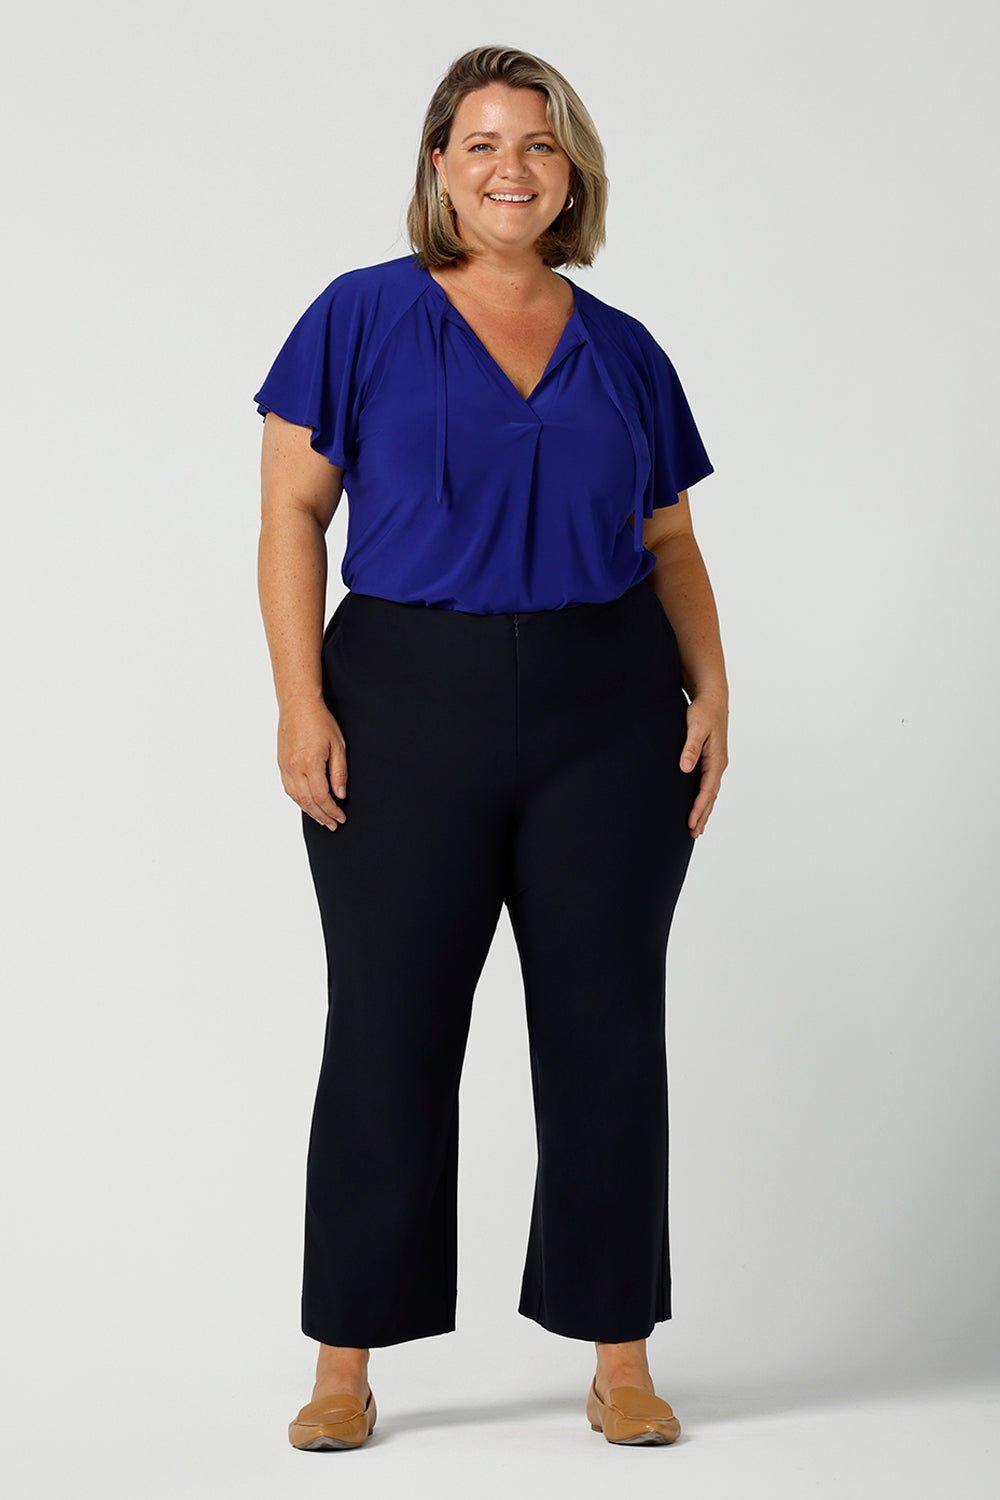 Great pants for curvy women, these flared leg, cropped pants are tailored for smart casual office wear. Worn with a V-neck, flutter sleeve top in cobalt blue, and shown on a size 18 woman, these plus size navy blue pants are made in Australia by Australian and New Zealand women's clothing brand, Leina & Fleur. Shop quality pants in sizes 8 to 24 in their online fashion boutique!